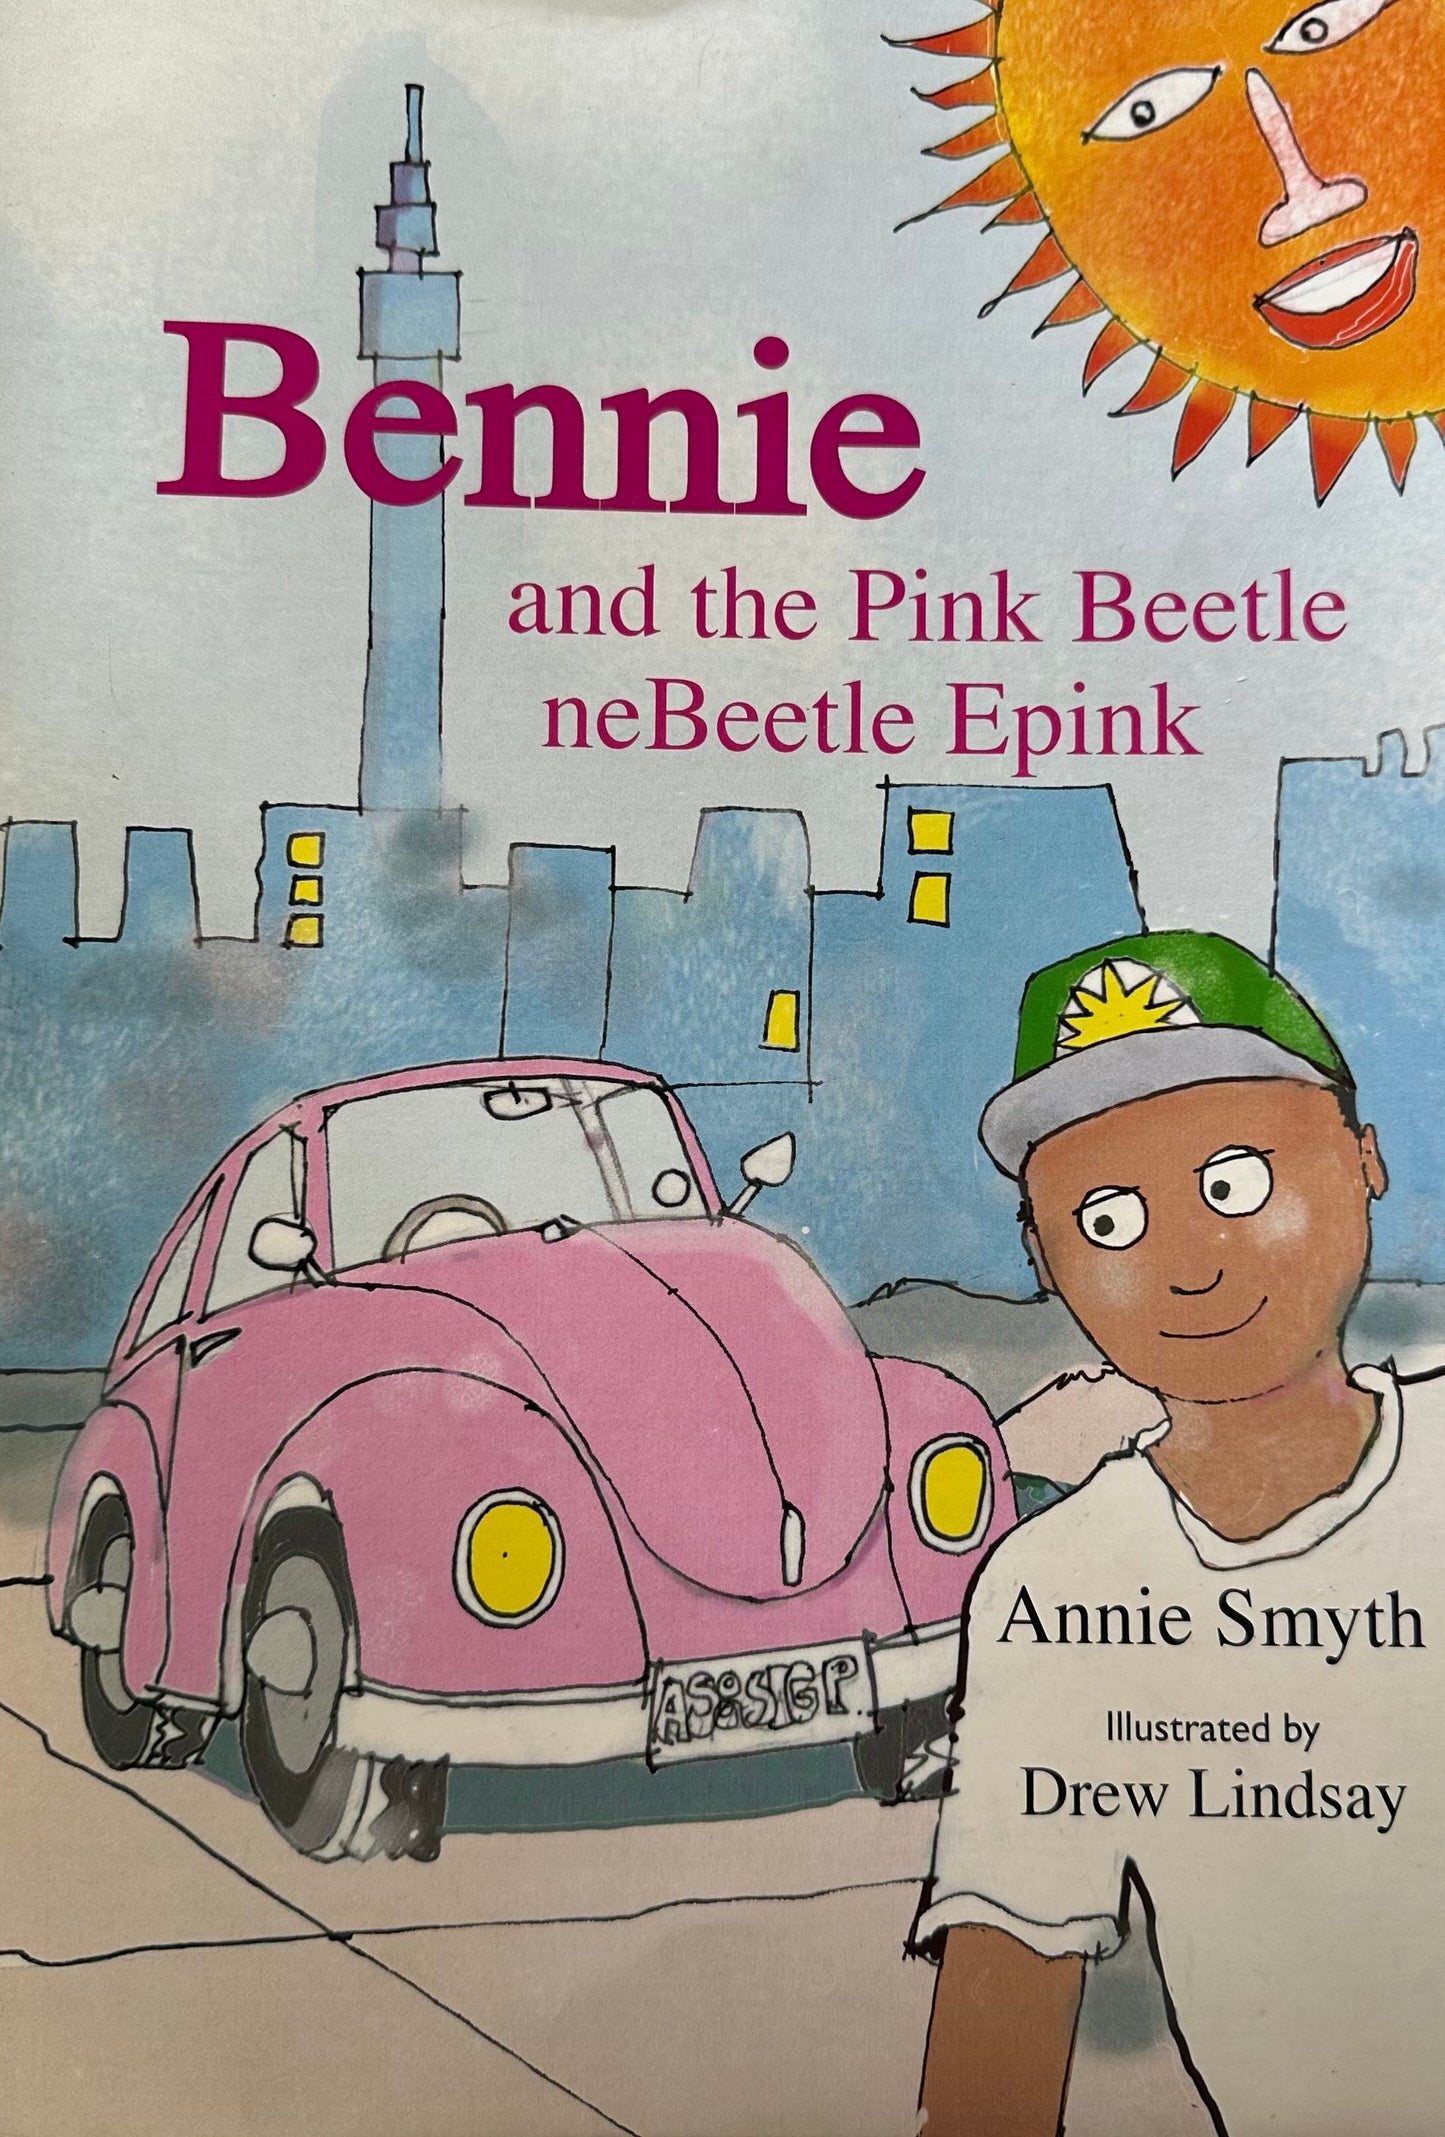 Bennie and The Pink Beetle / neBeetle Epink, by Anne Smyth (English and isiZulu)